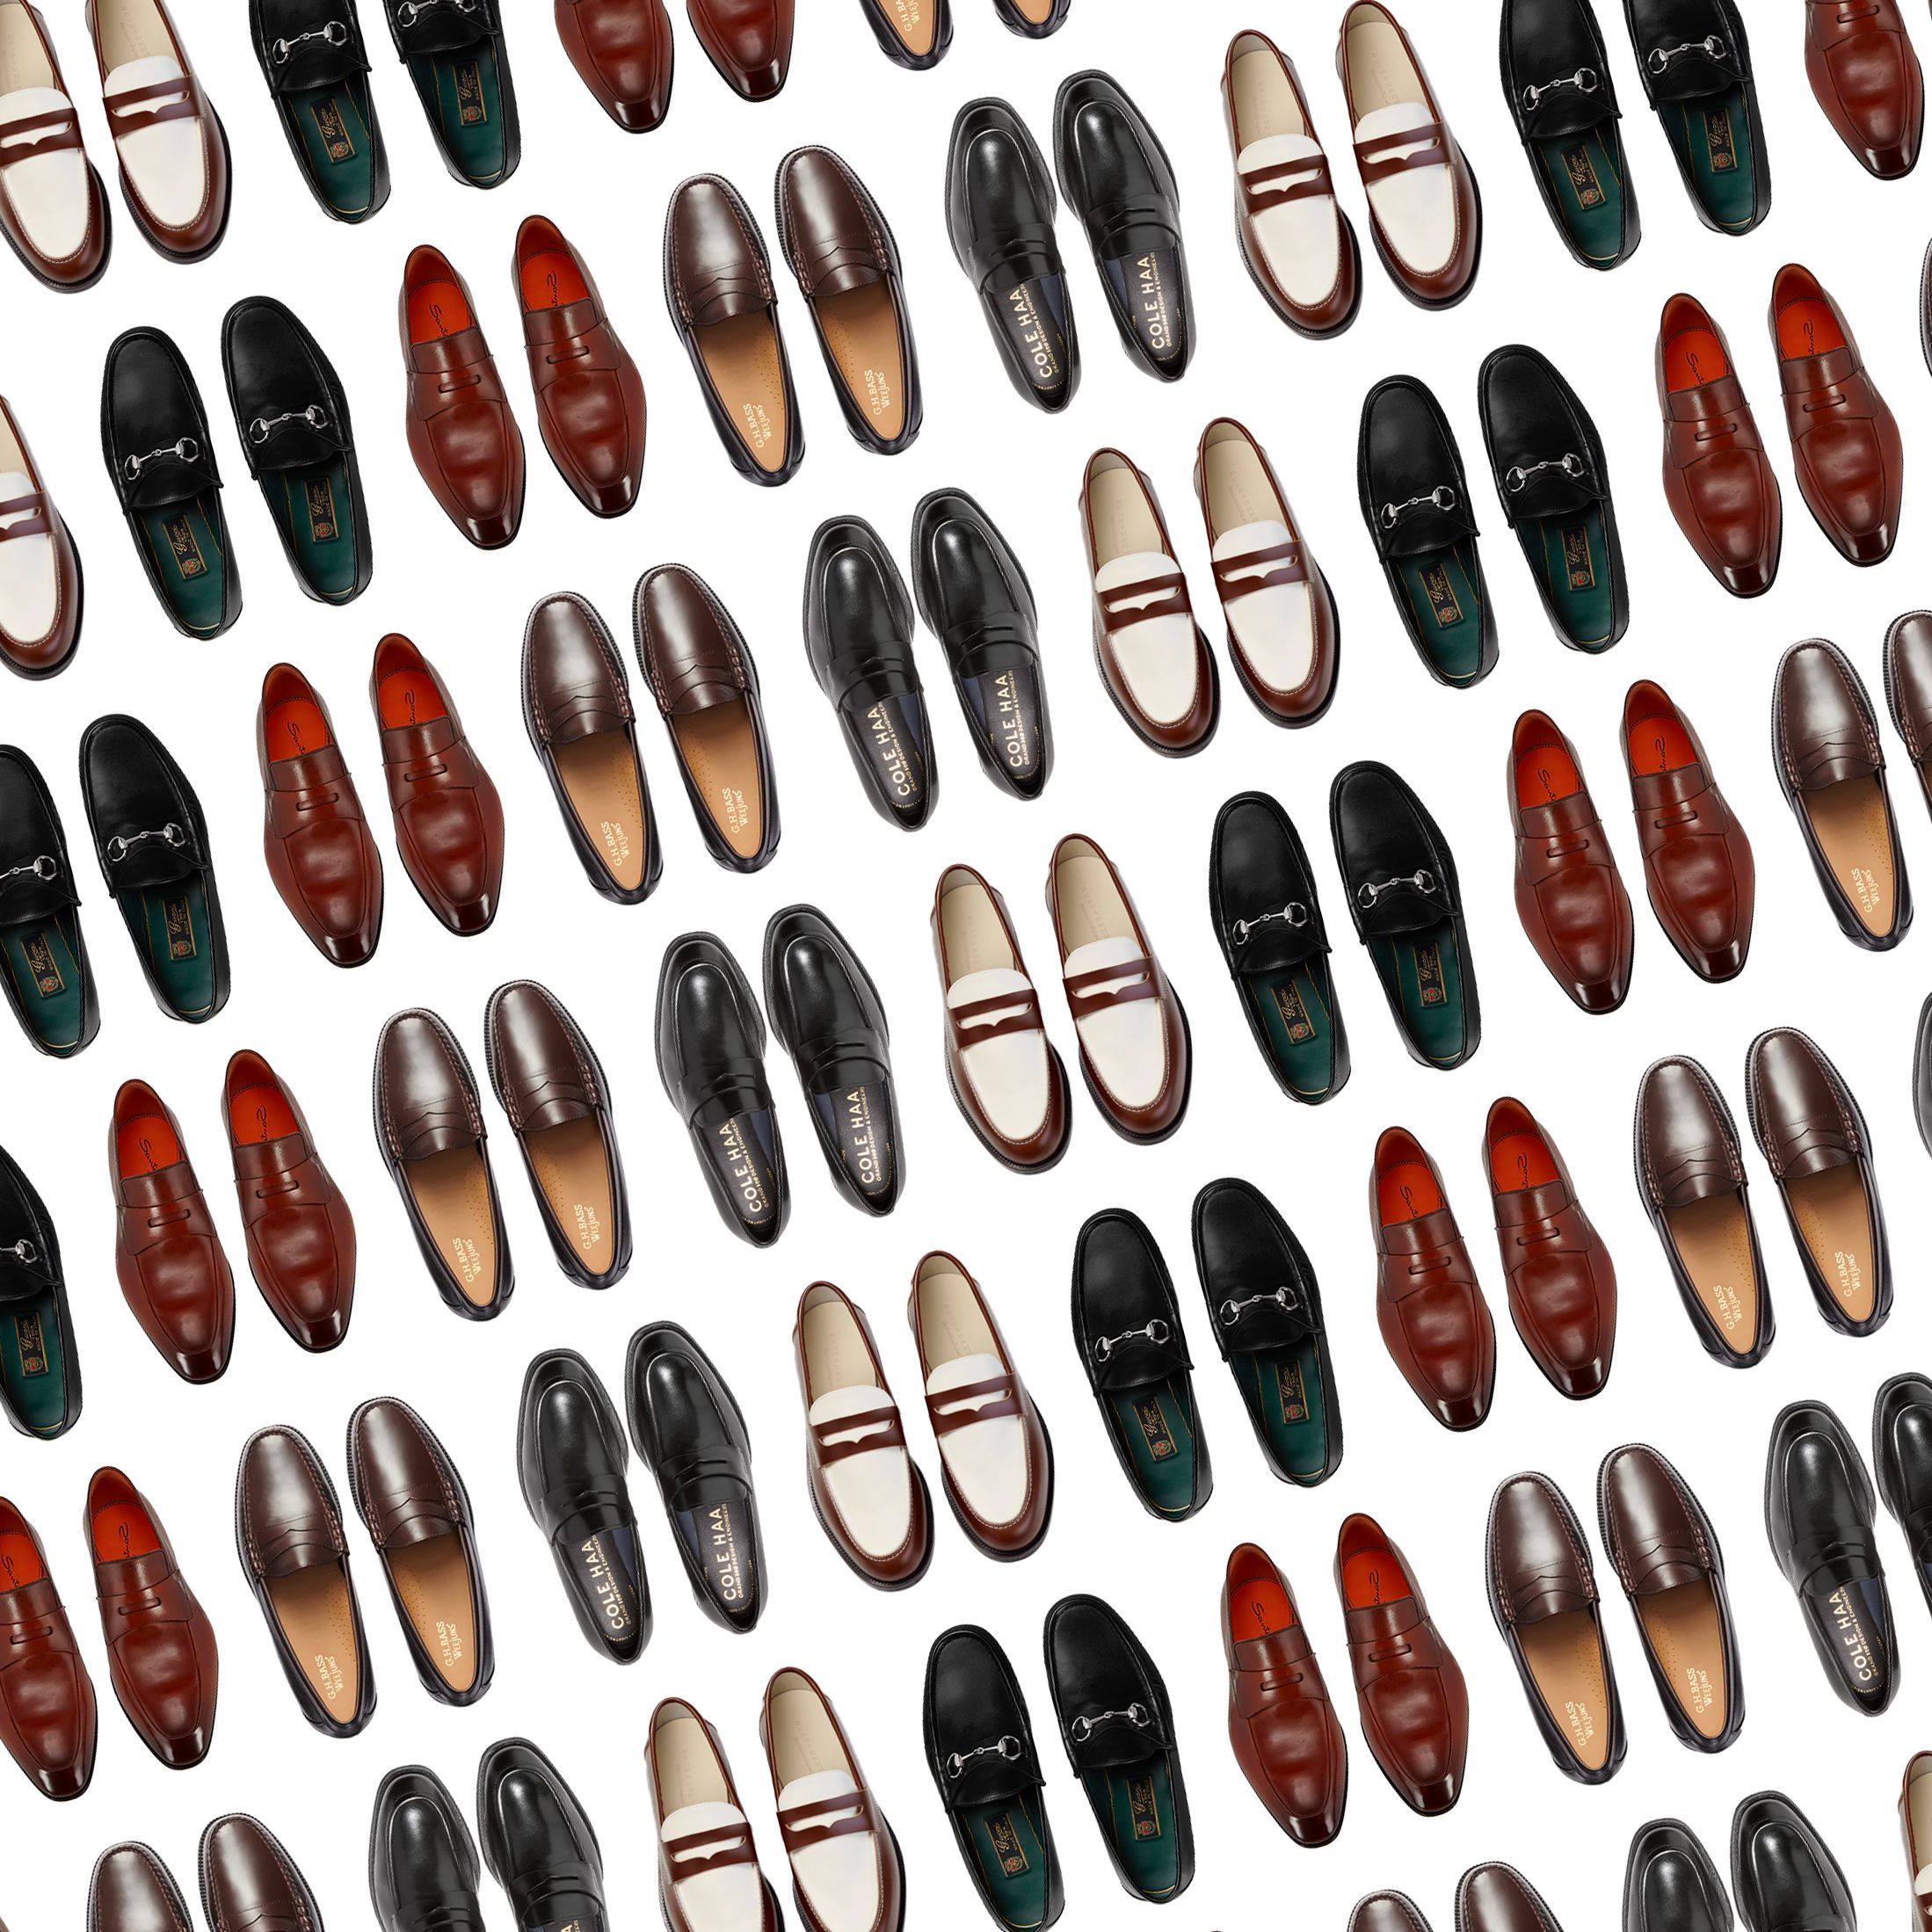 15 Stylish Loafers for Men, According to a Celebrity Stylist